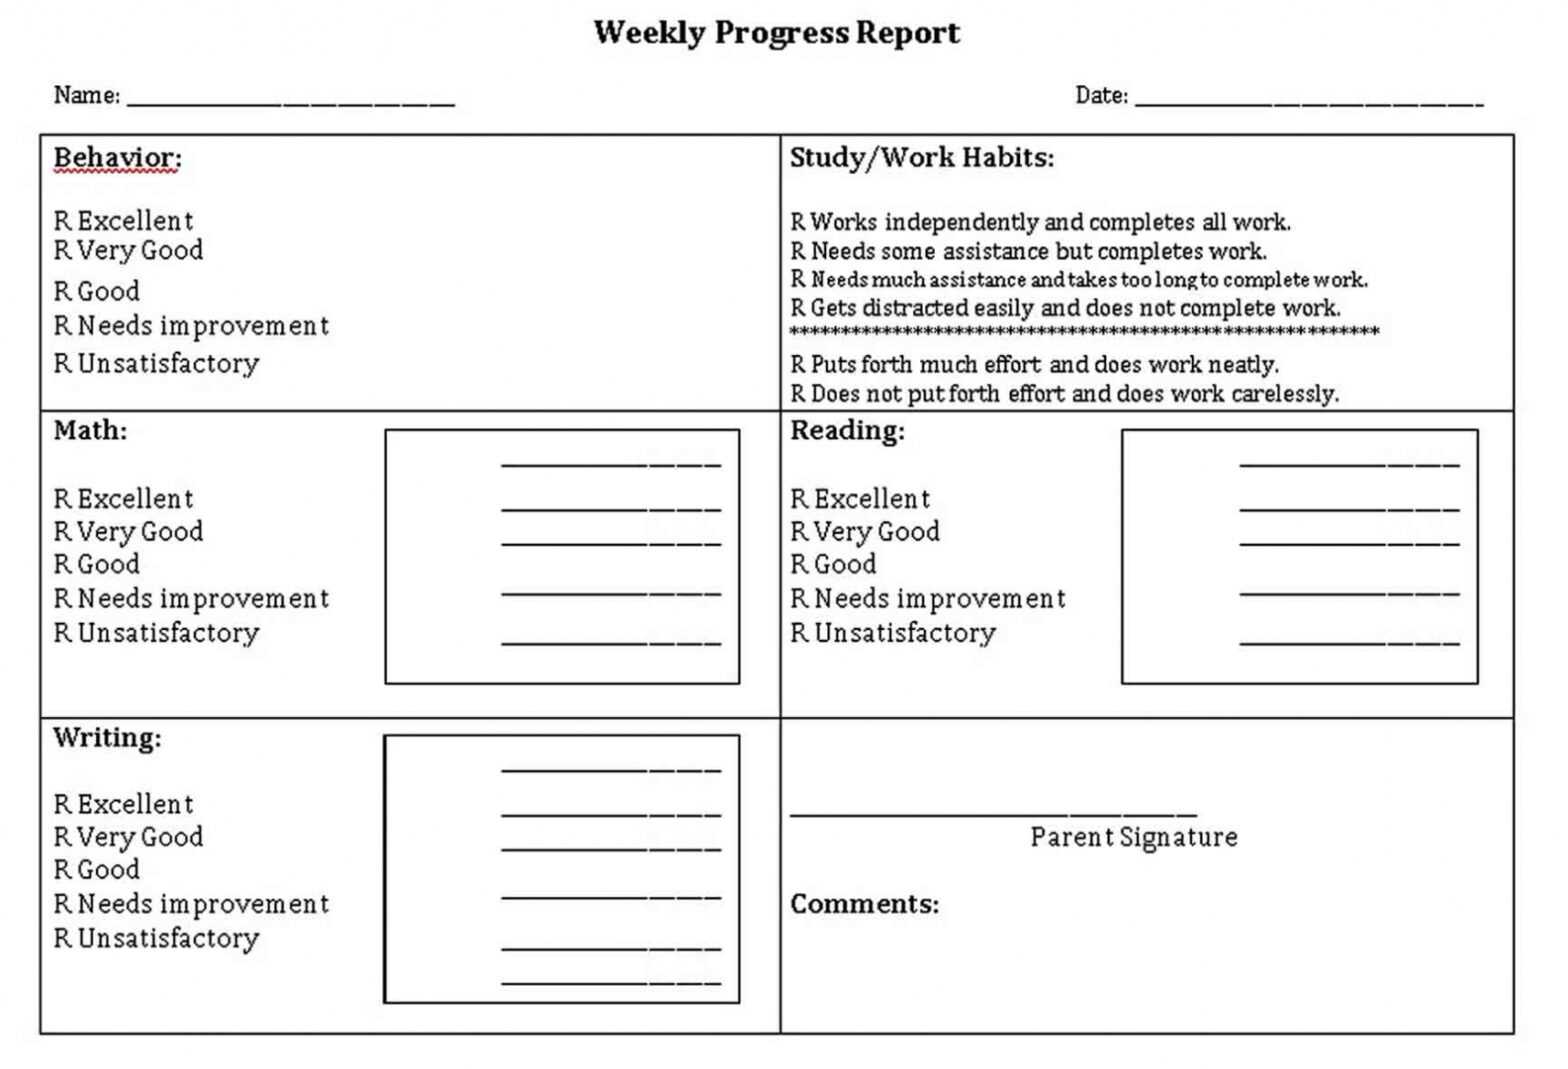 Weekly Student Report Template | Think Moldova intended for Daily Behavior Report Template